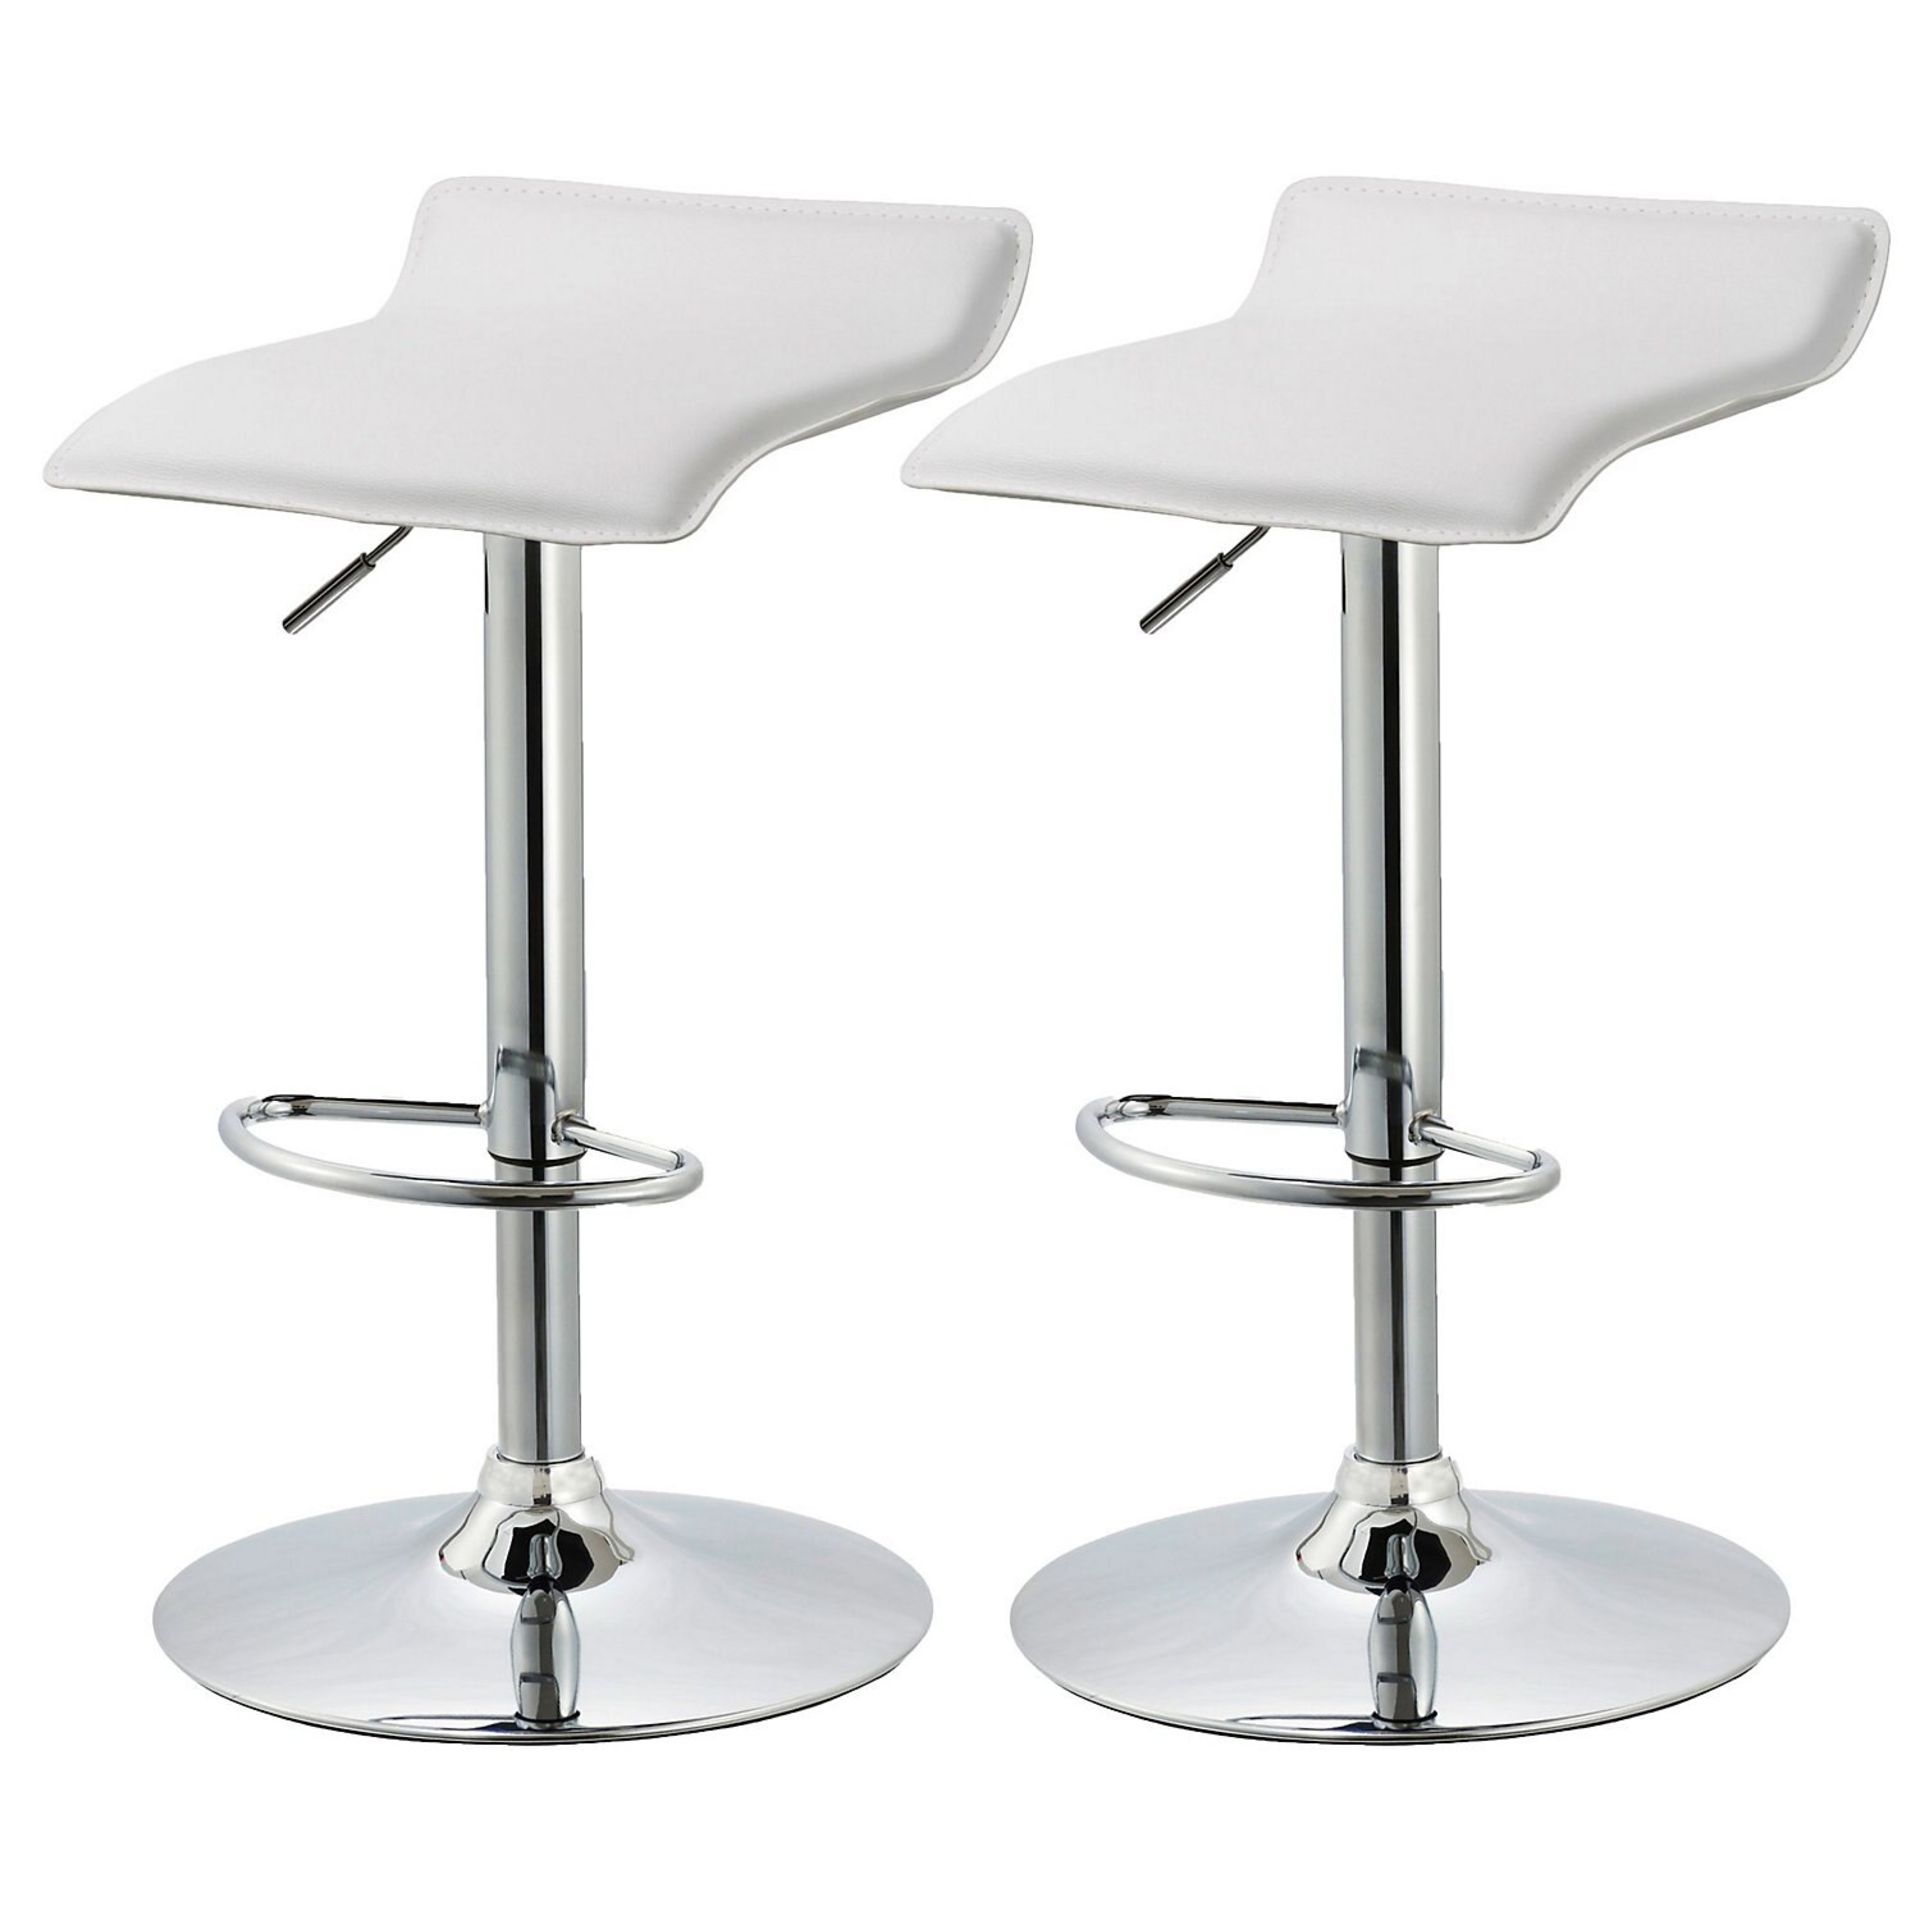 NEW Dante White & Chrome effect Bar stool (H)850mm (W)415mm. Bar Stools are a great way to inco... - Image 2 of 2